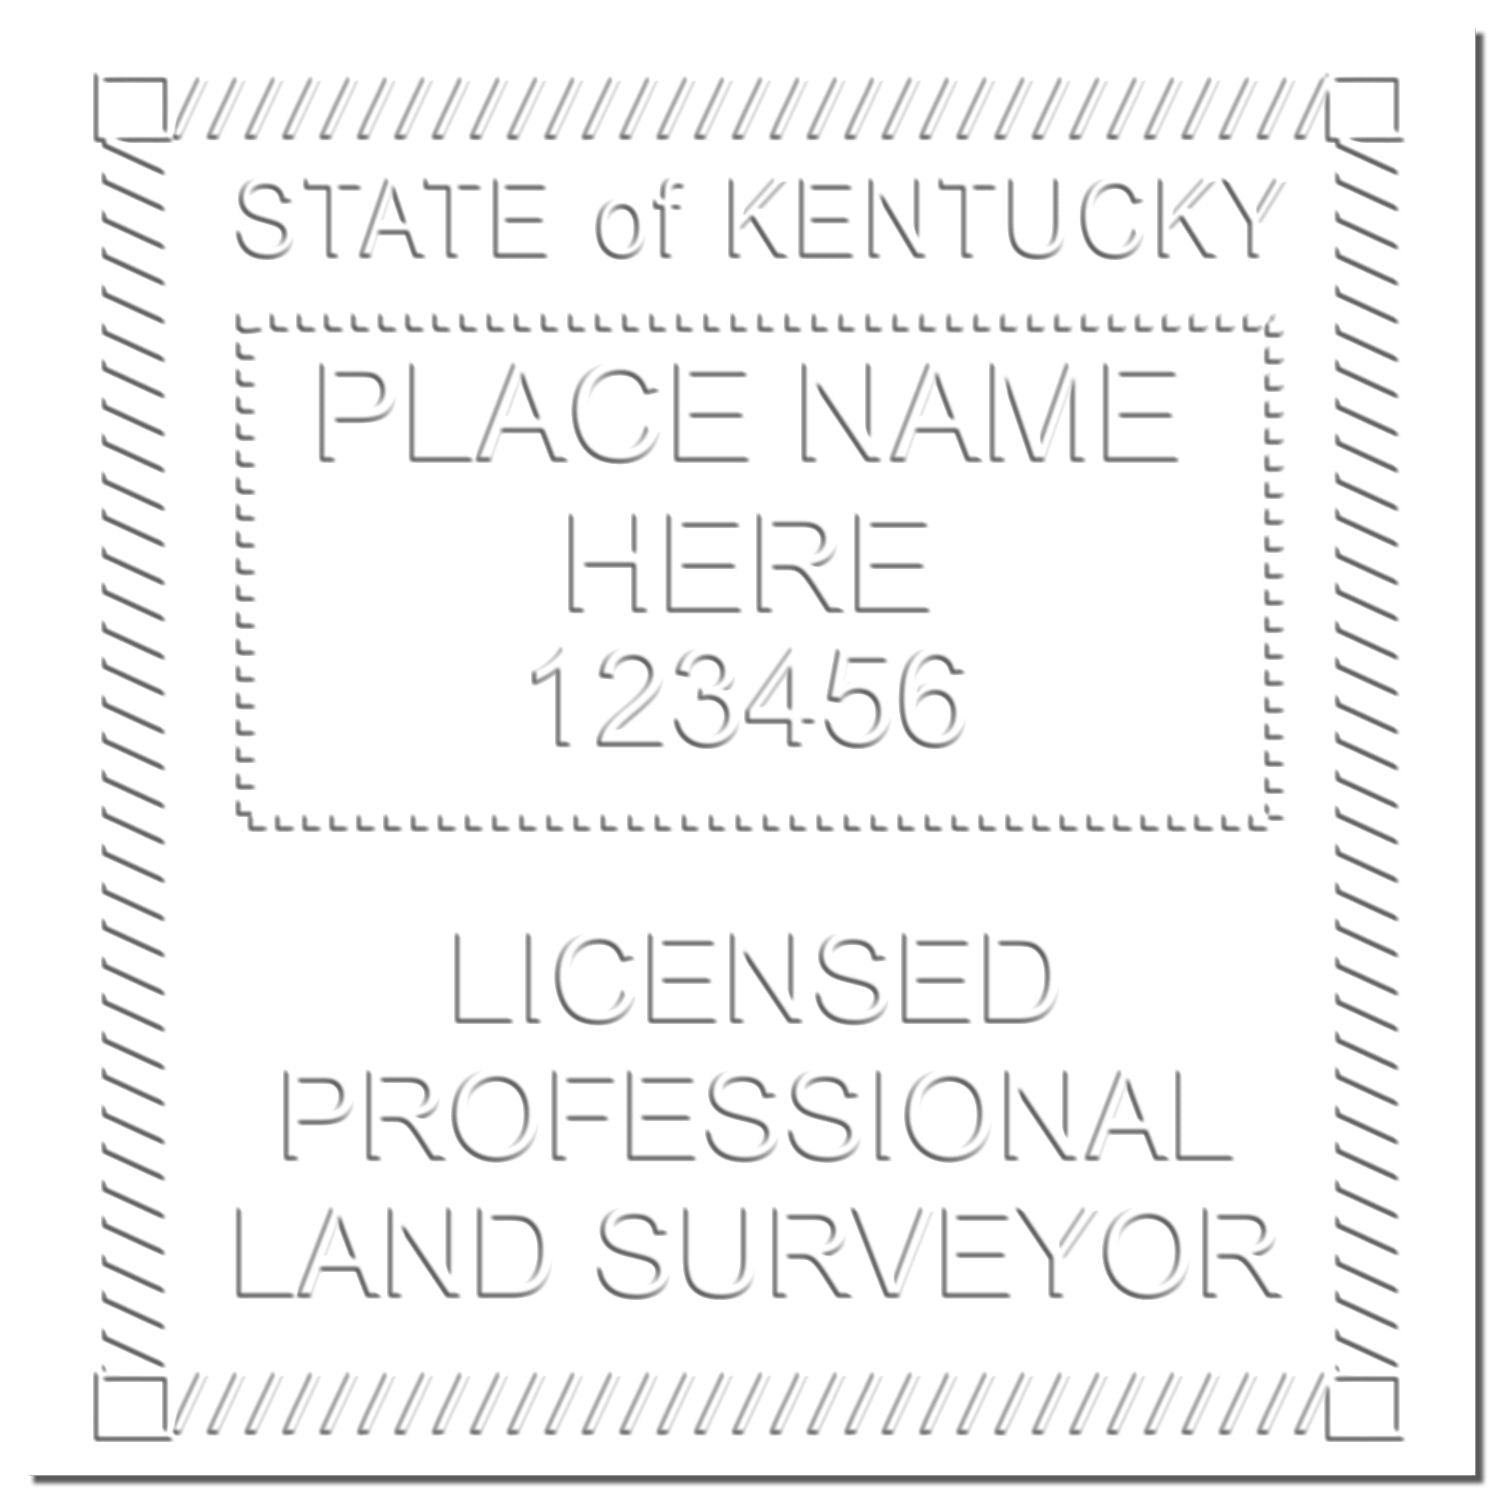 This paper is stamped with a sample imprint of the Long Reach Kentucky Land Surveyor Seal, signifying its quality and reliability.